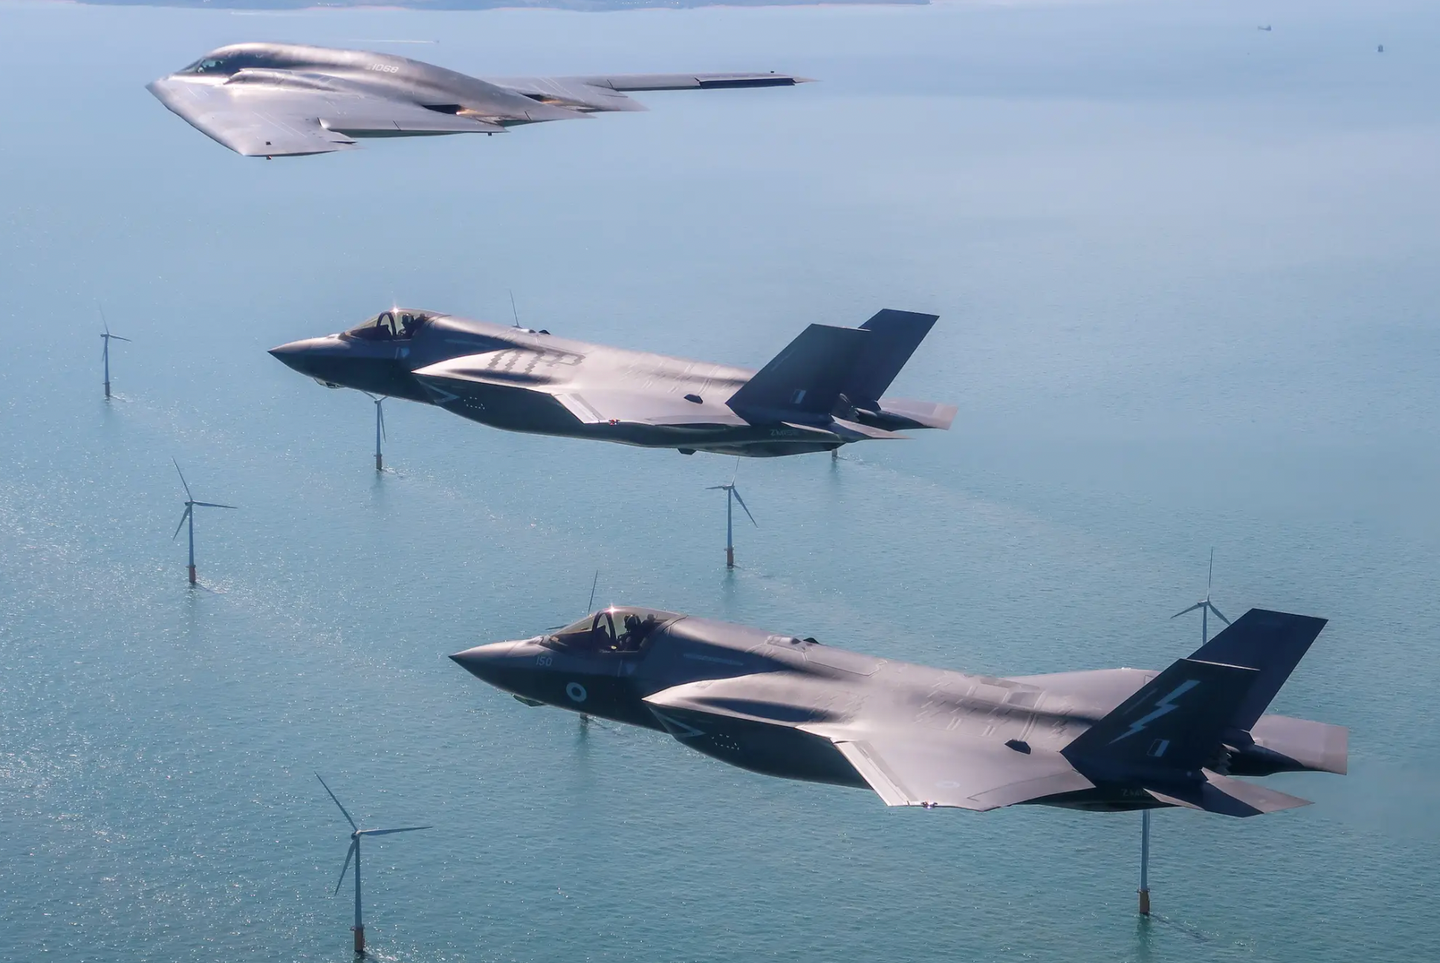 Two Royal Air Force F-35Bs (with ZM152 further from the camera) accompany a U.S. Air Force B-2 stealth bomber over the English coast during integration flying training in 2019.&nbsp;<em>Crown Copyright</em>